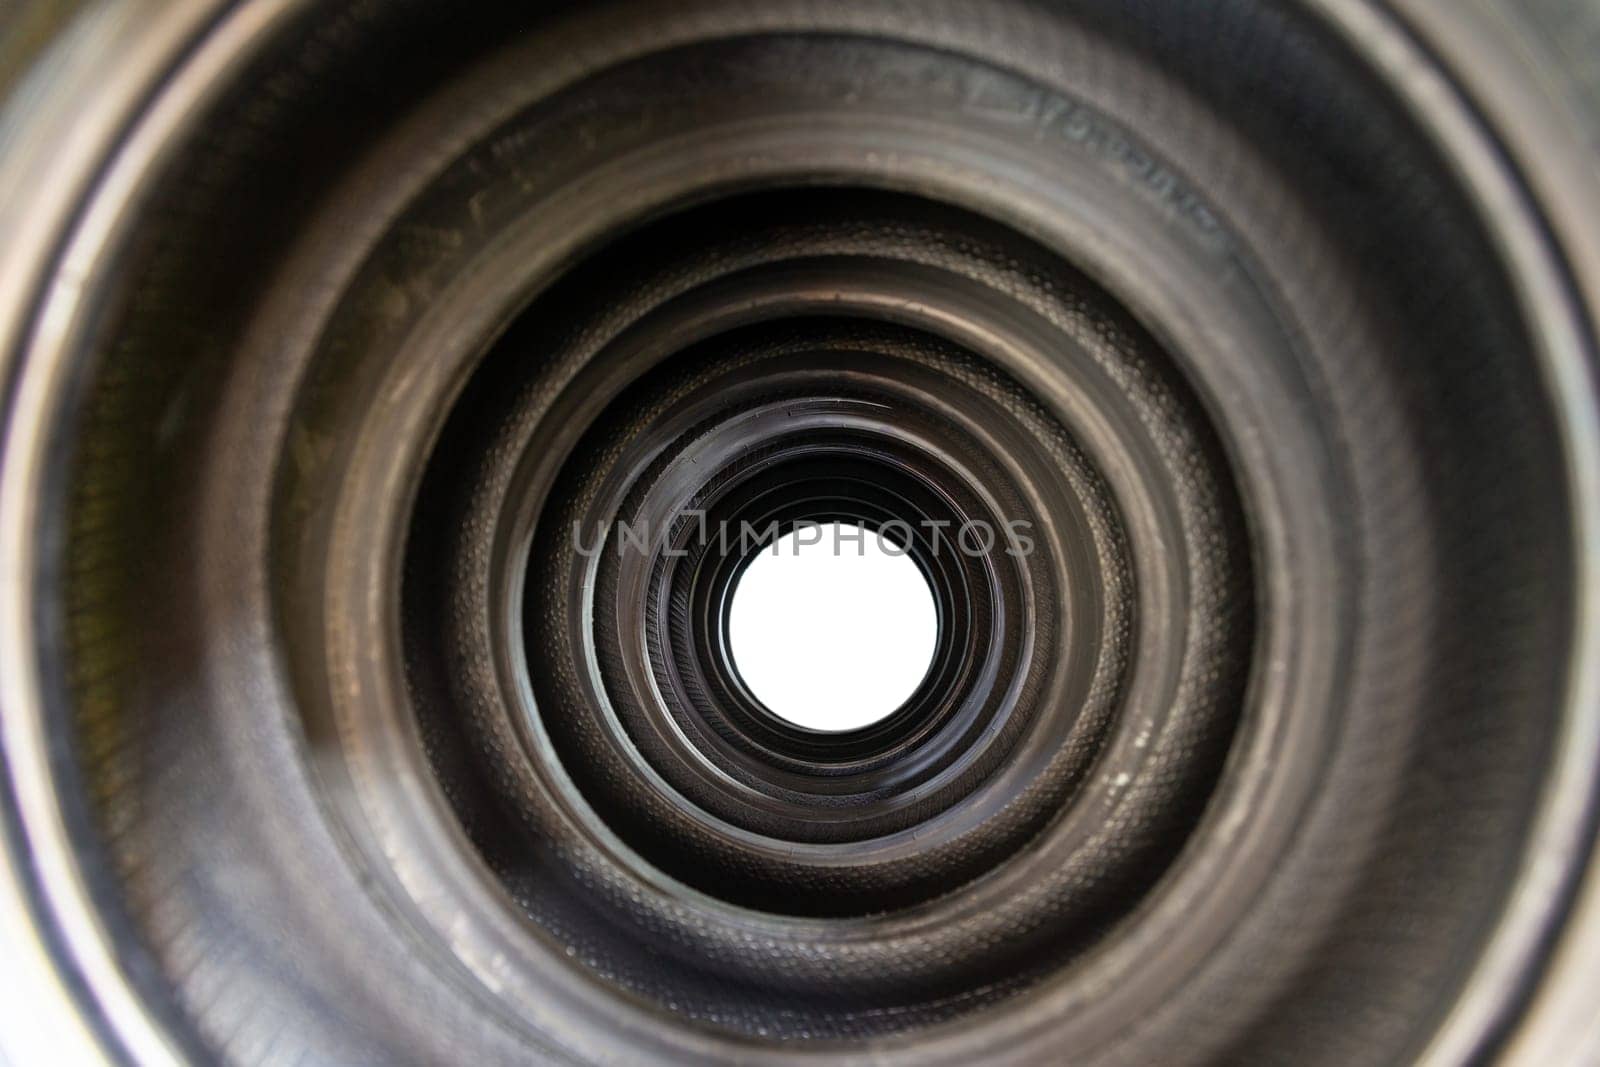 A tunnel of new car tires standing on a store counter with concentrated rings by BY-_-BY